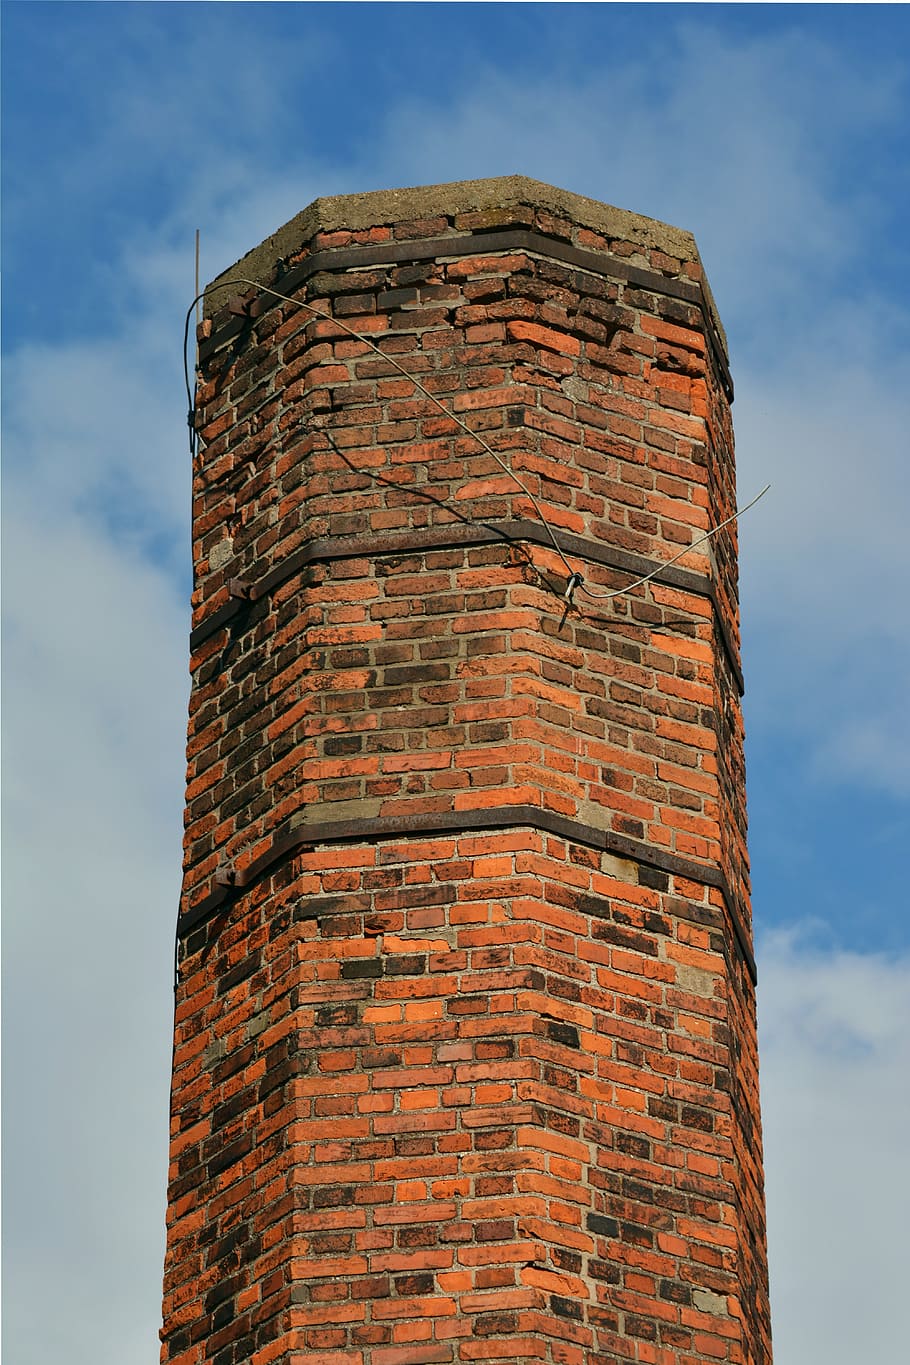 chimney, brick, old, fireplace, sky, low angle view, architecture, built structure, day, nature